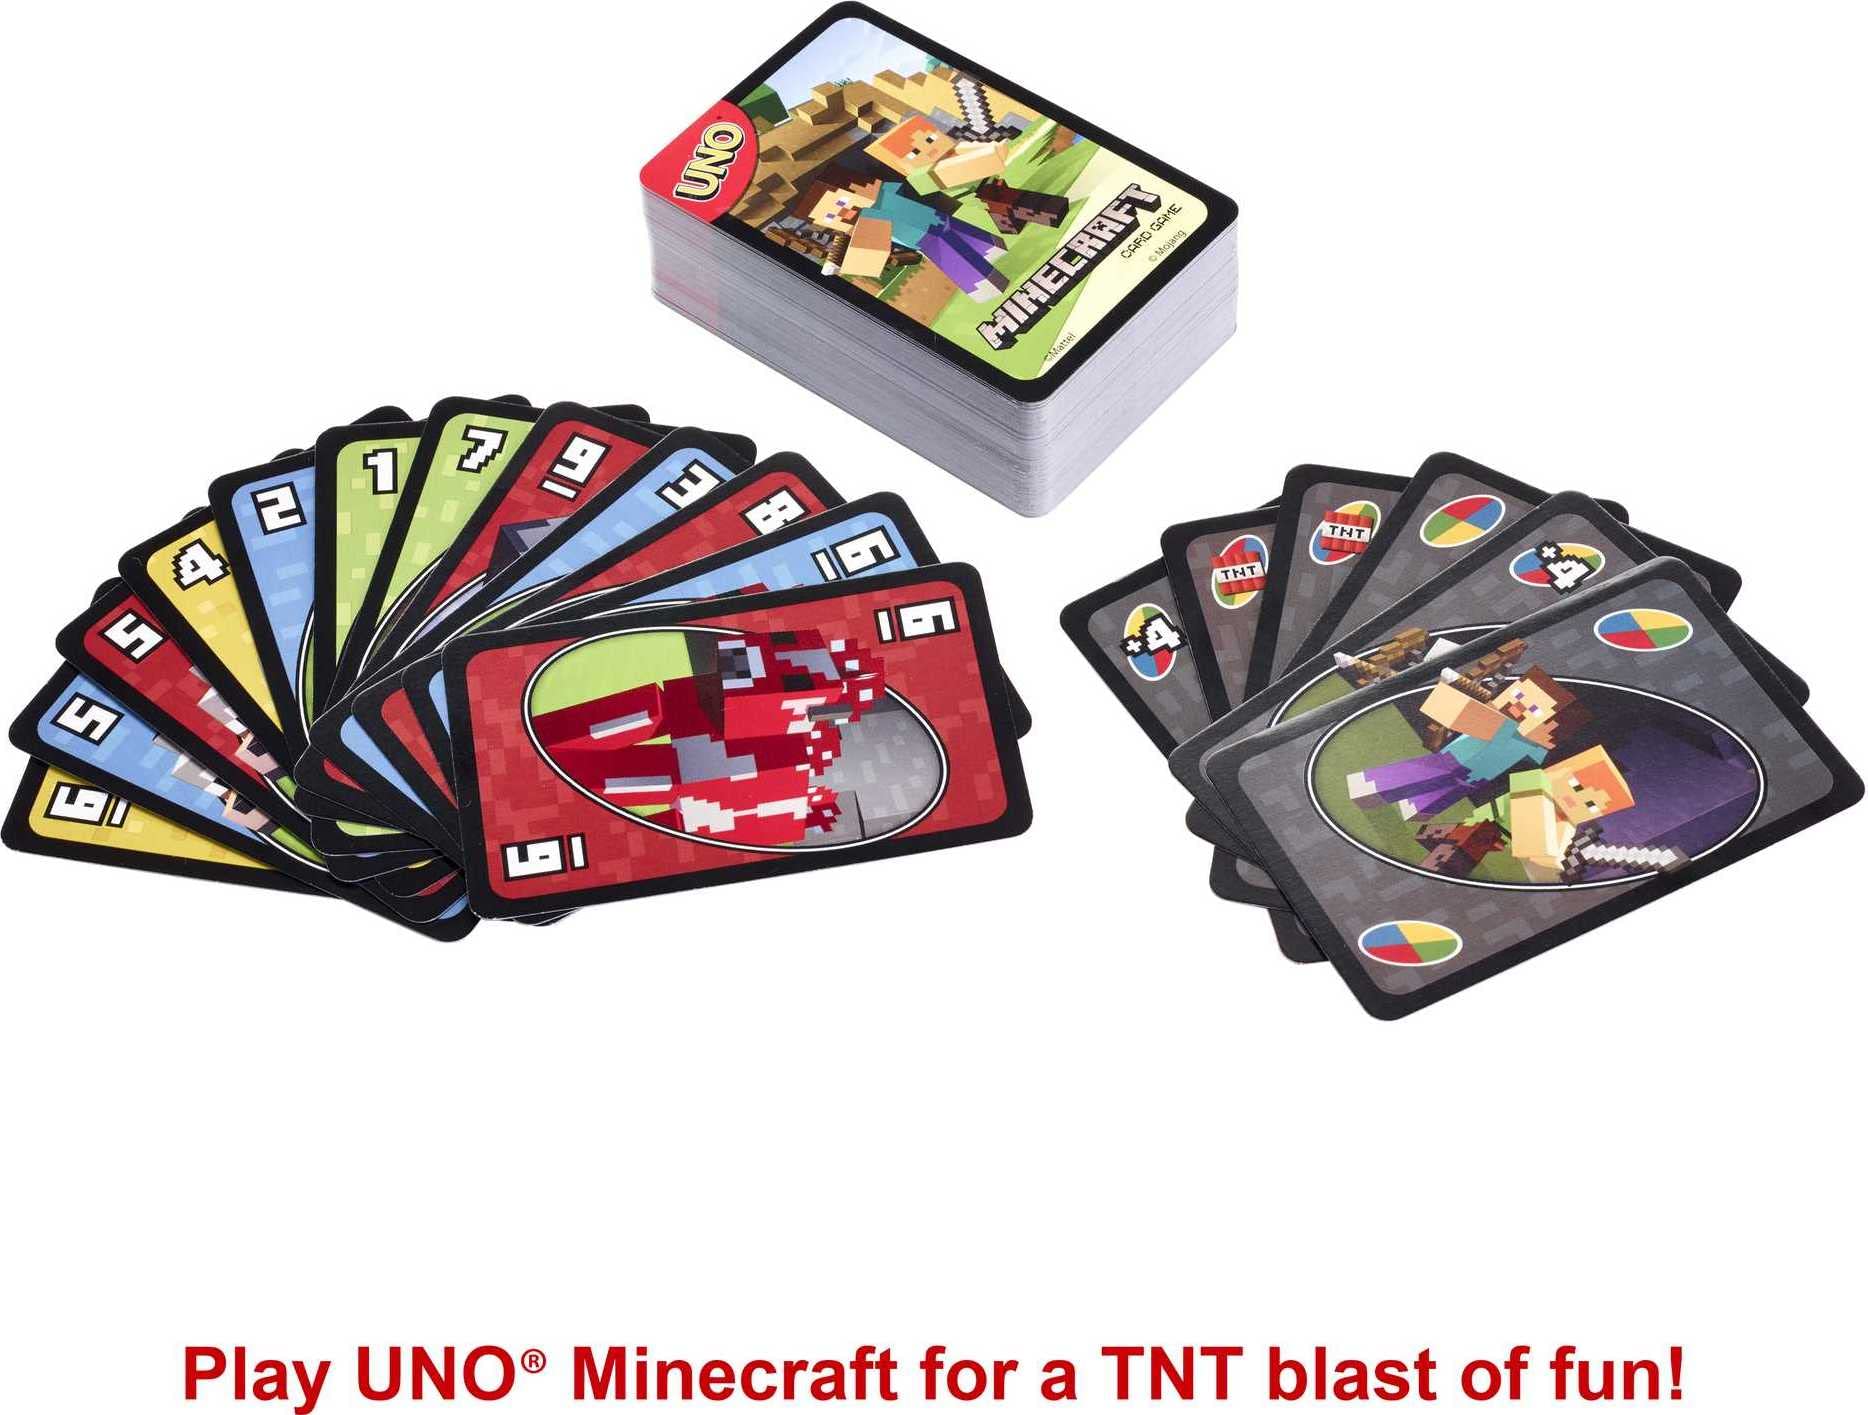 UNO Minecraft Card Game for Family Night with Minecraft-Themed Graphics in a Collectible Tin for 2-10 Players (Amazon Exclusive)